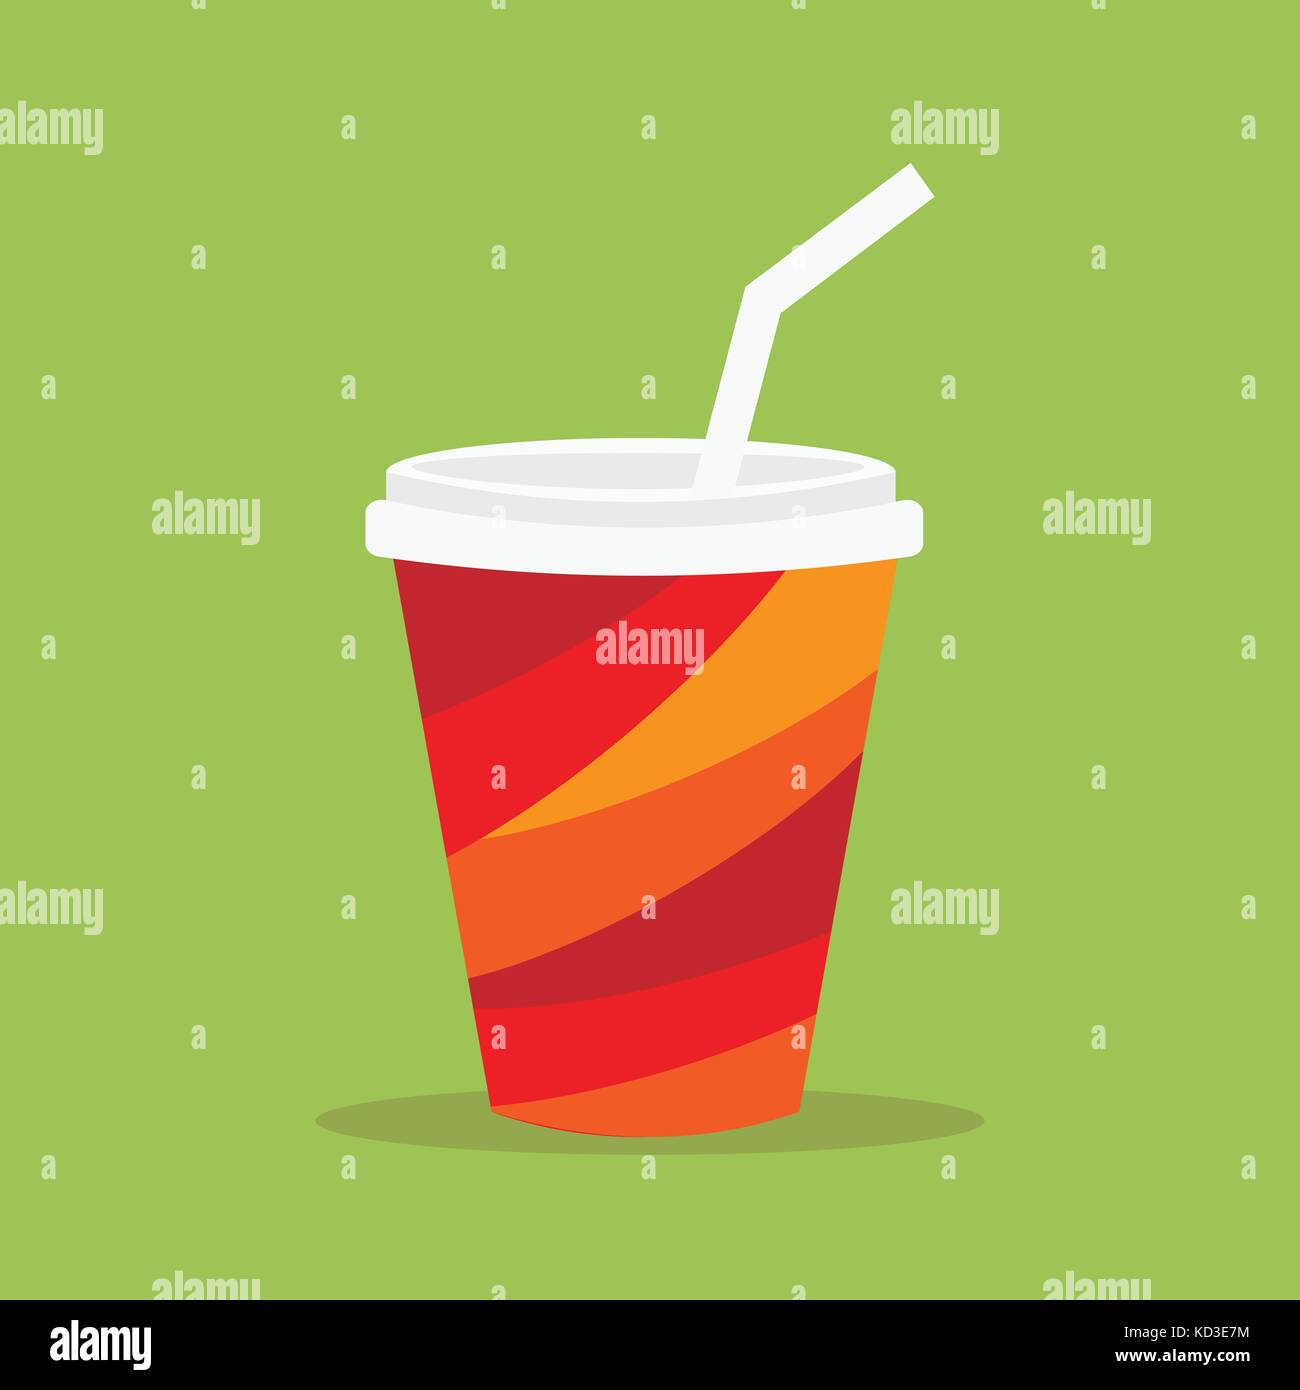 Paper glass icon. Paper red cups with straws for soda or cold beverage. Stock Vector